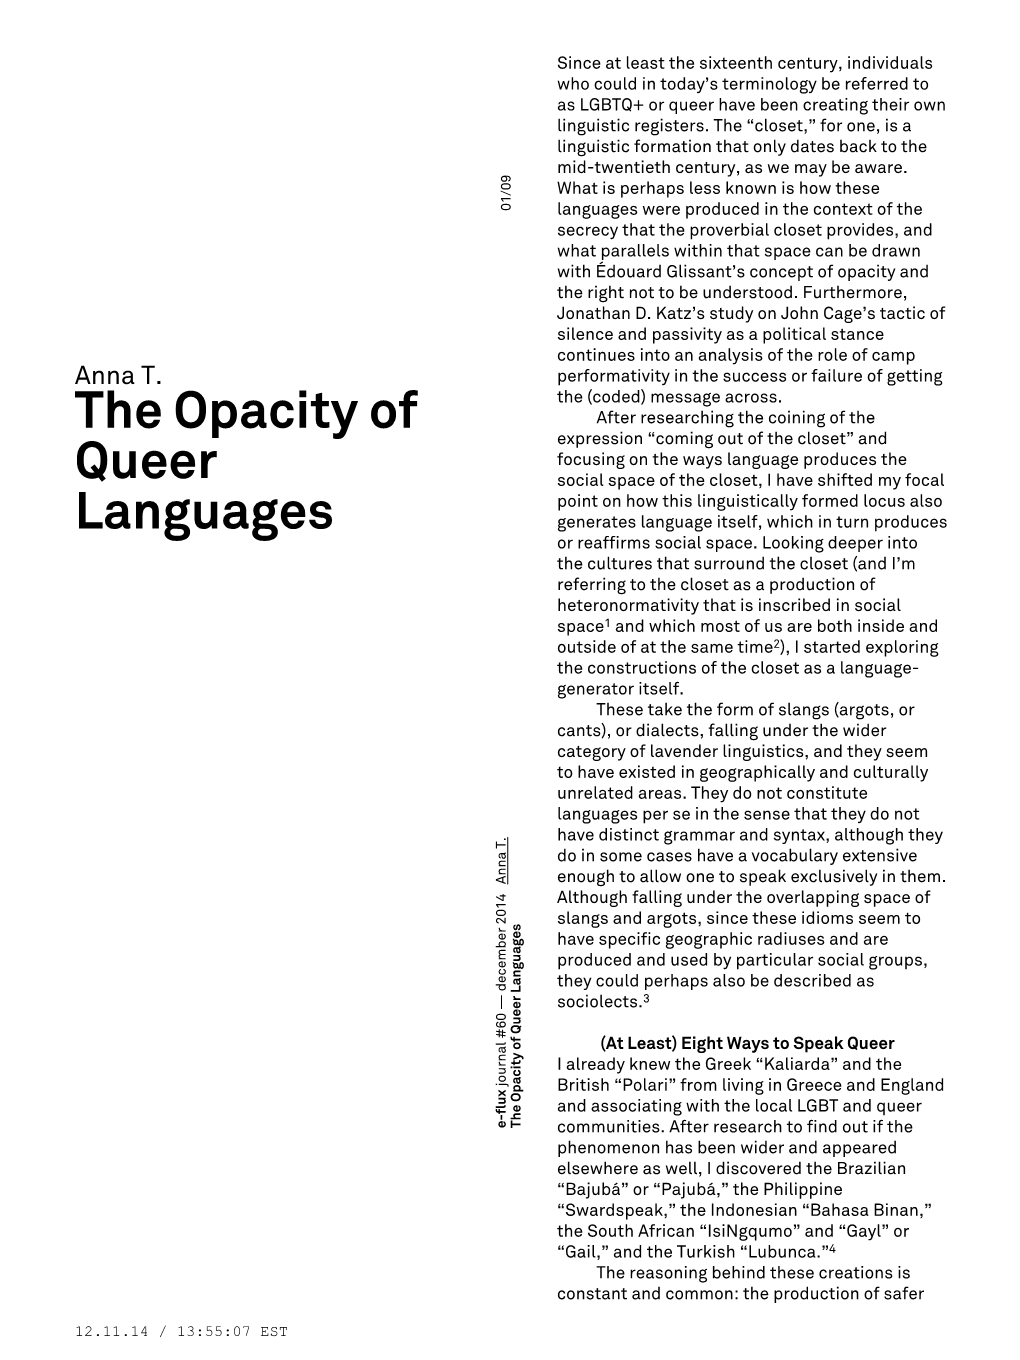 The Opacity of Queer Languages